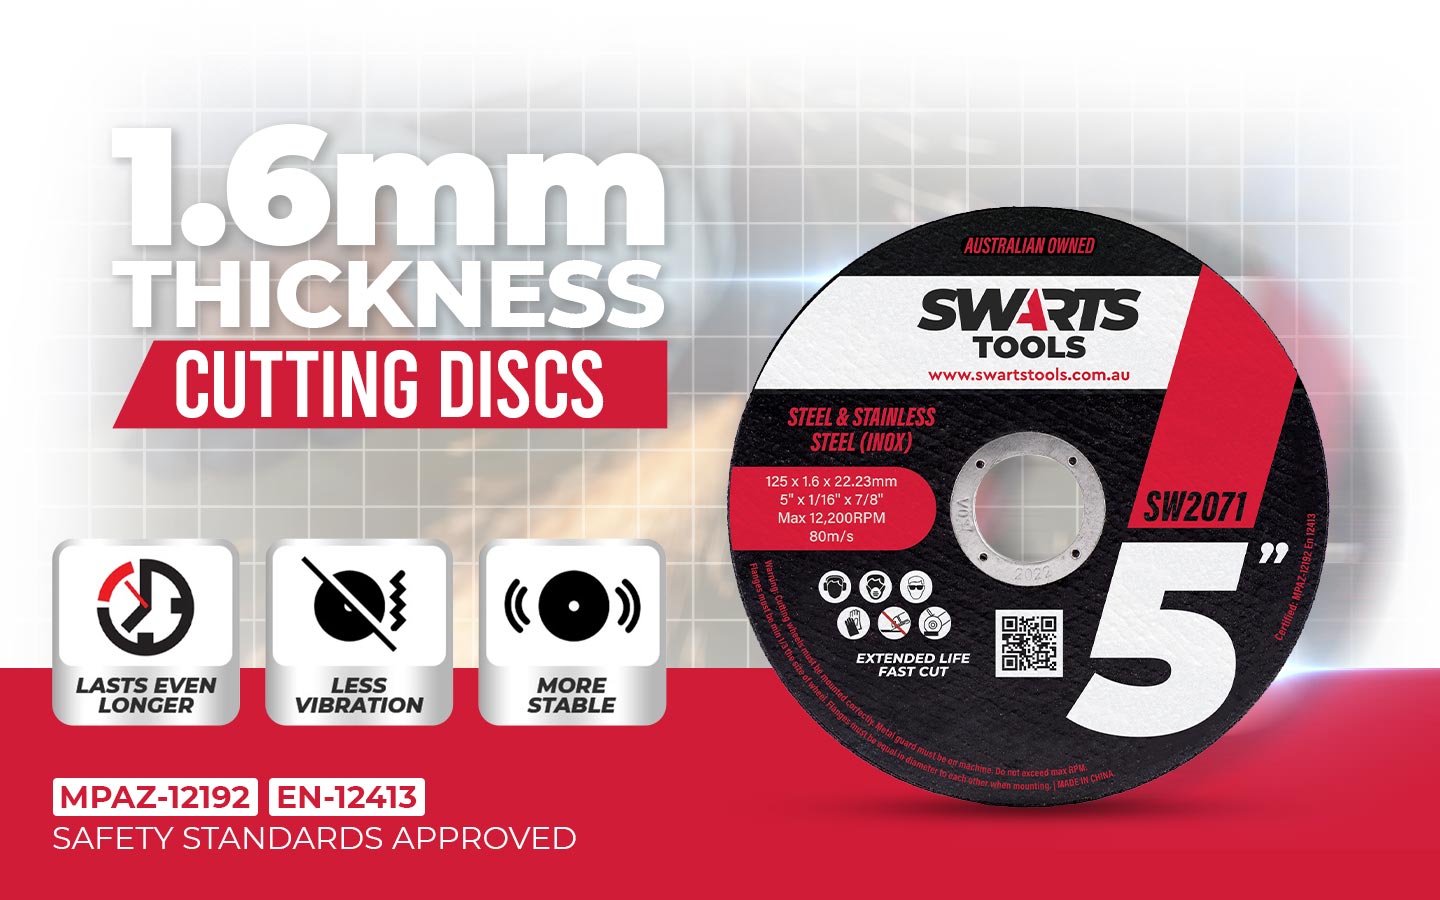 1.6mm thickness cutting discs. lasts even longer, less vibration, more stable. with safety standards approved MPAZ-12192 & EN-12413